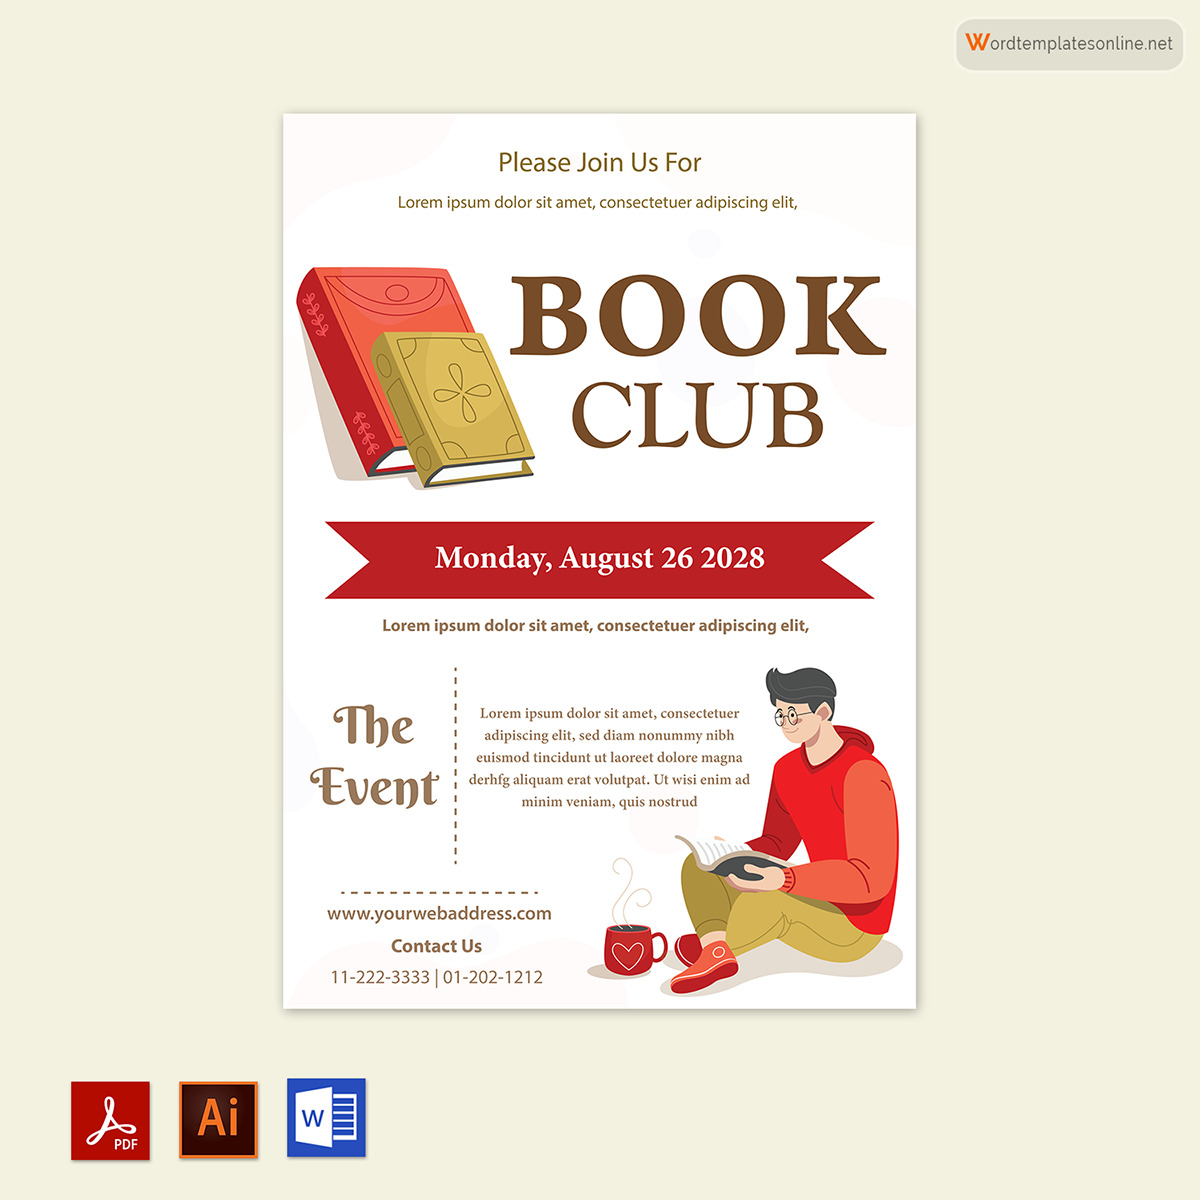 Book Club Flyer Templates - Free Word, PSD, AI Ideas and Inspiration